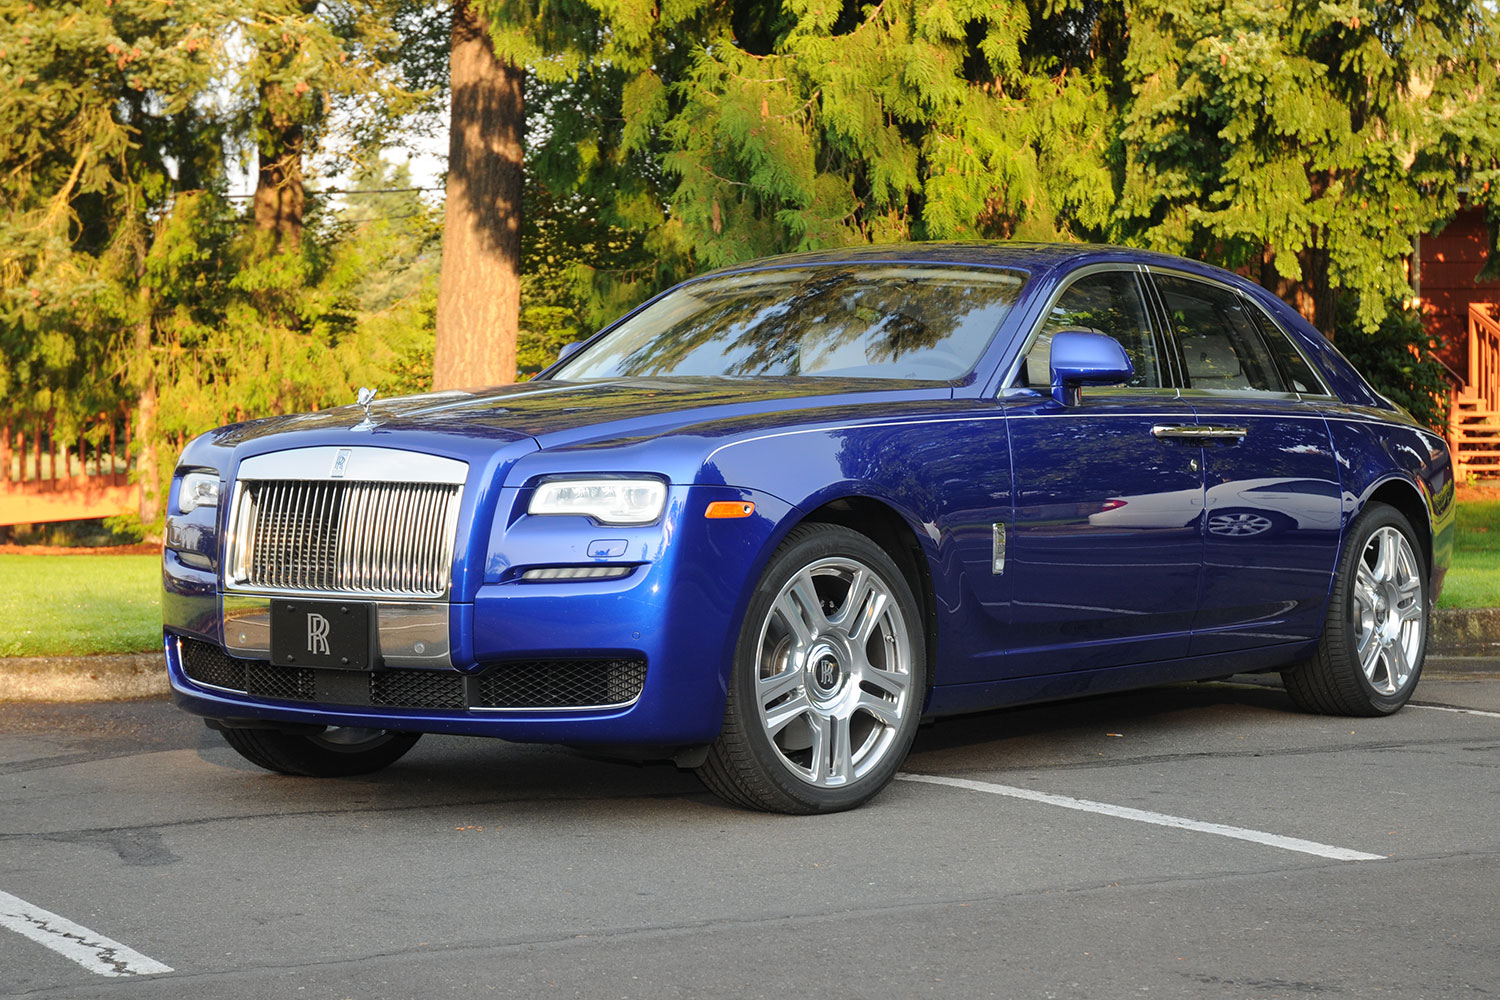 Rolls-Royce Ghost 2023 Reviews, News, Specs & Prices - Drive